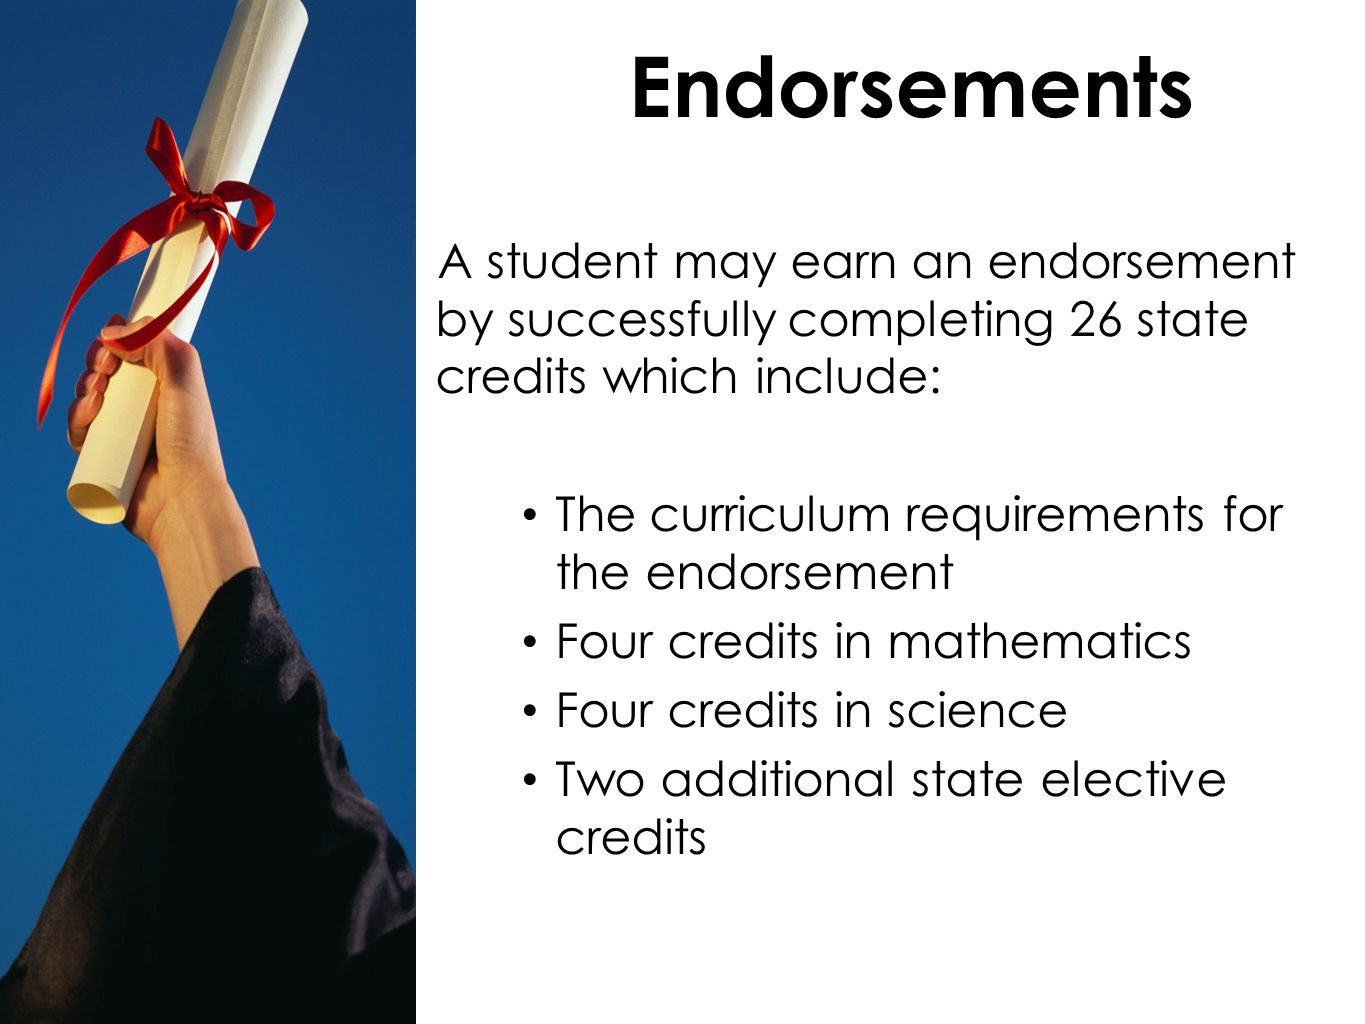 Endorsements A student may earn an endorsement by successfully completing 26 state credits which include: The curriculum requirements for the endorsement Four credits in mathematics Four credits in science Two additional state elective credits